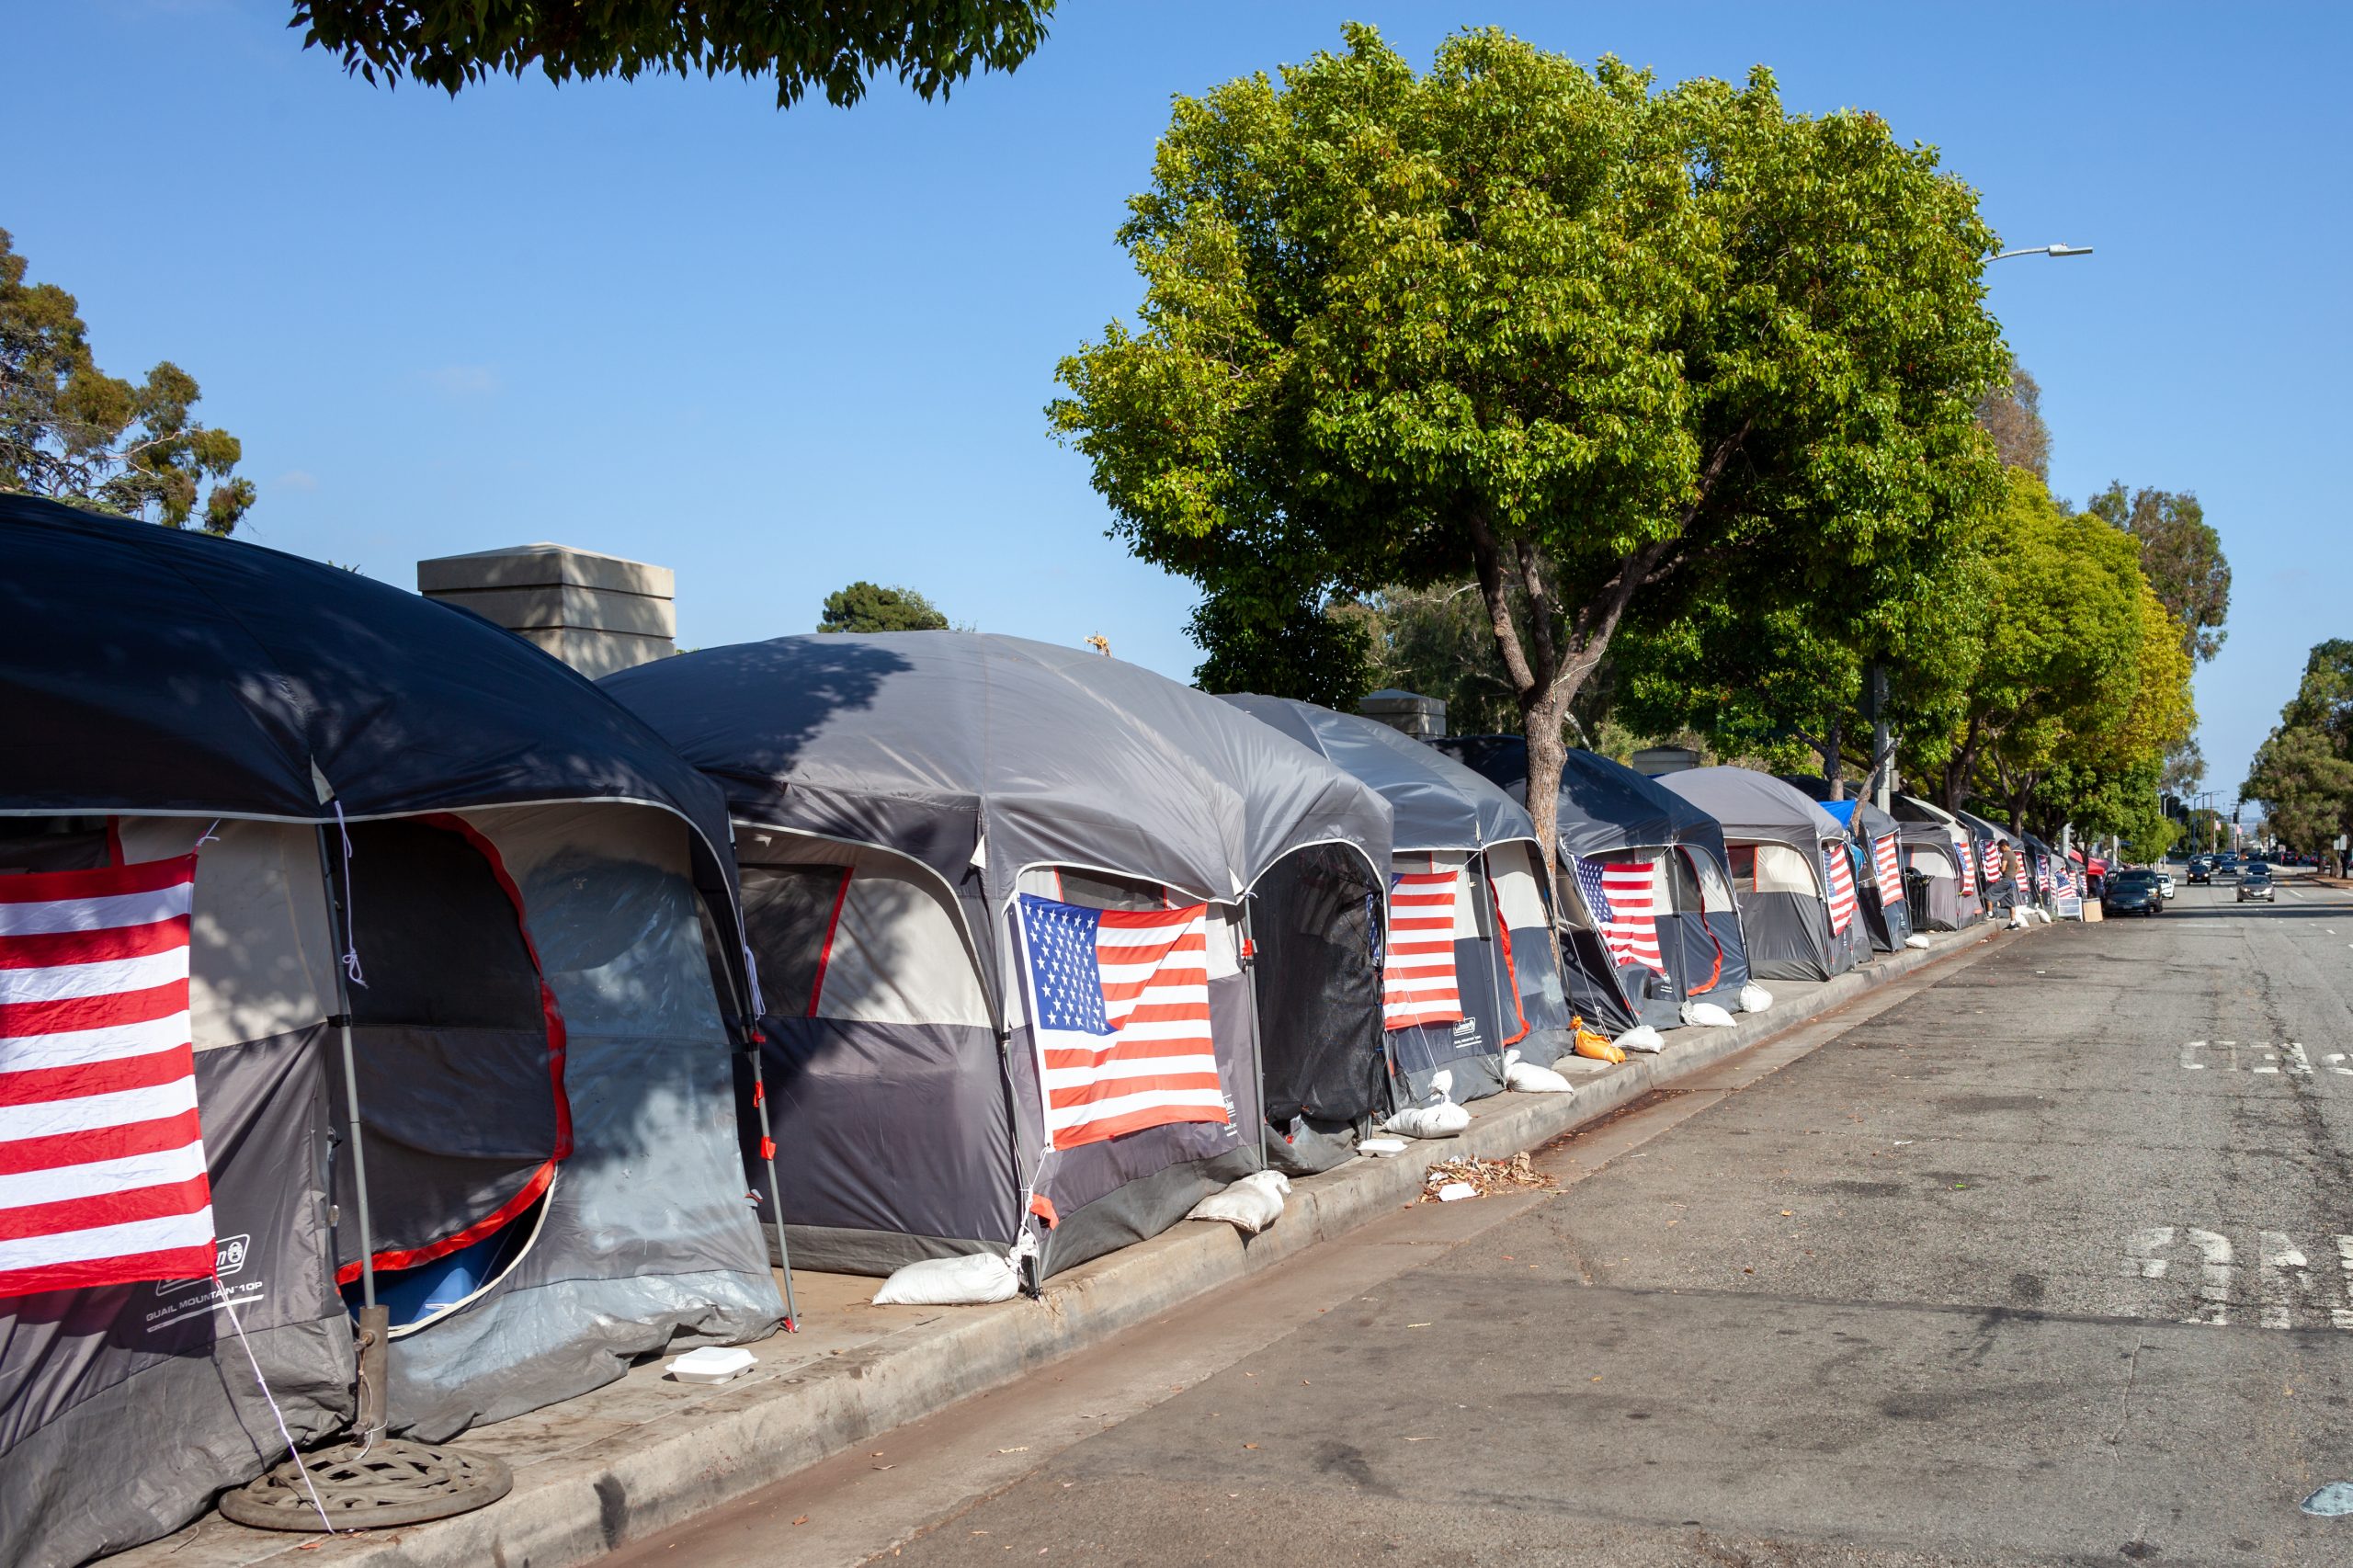 “Veterans Row” just outside VA land shows just how much work is left to be done for homeless veterans in LA